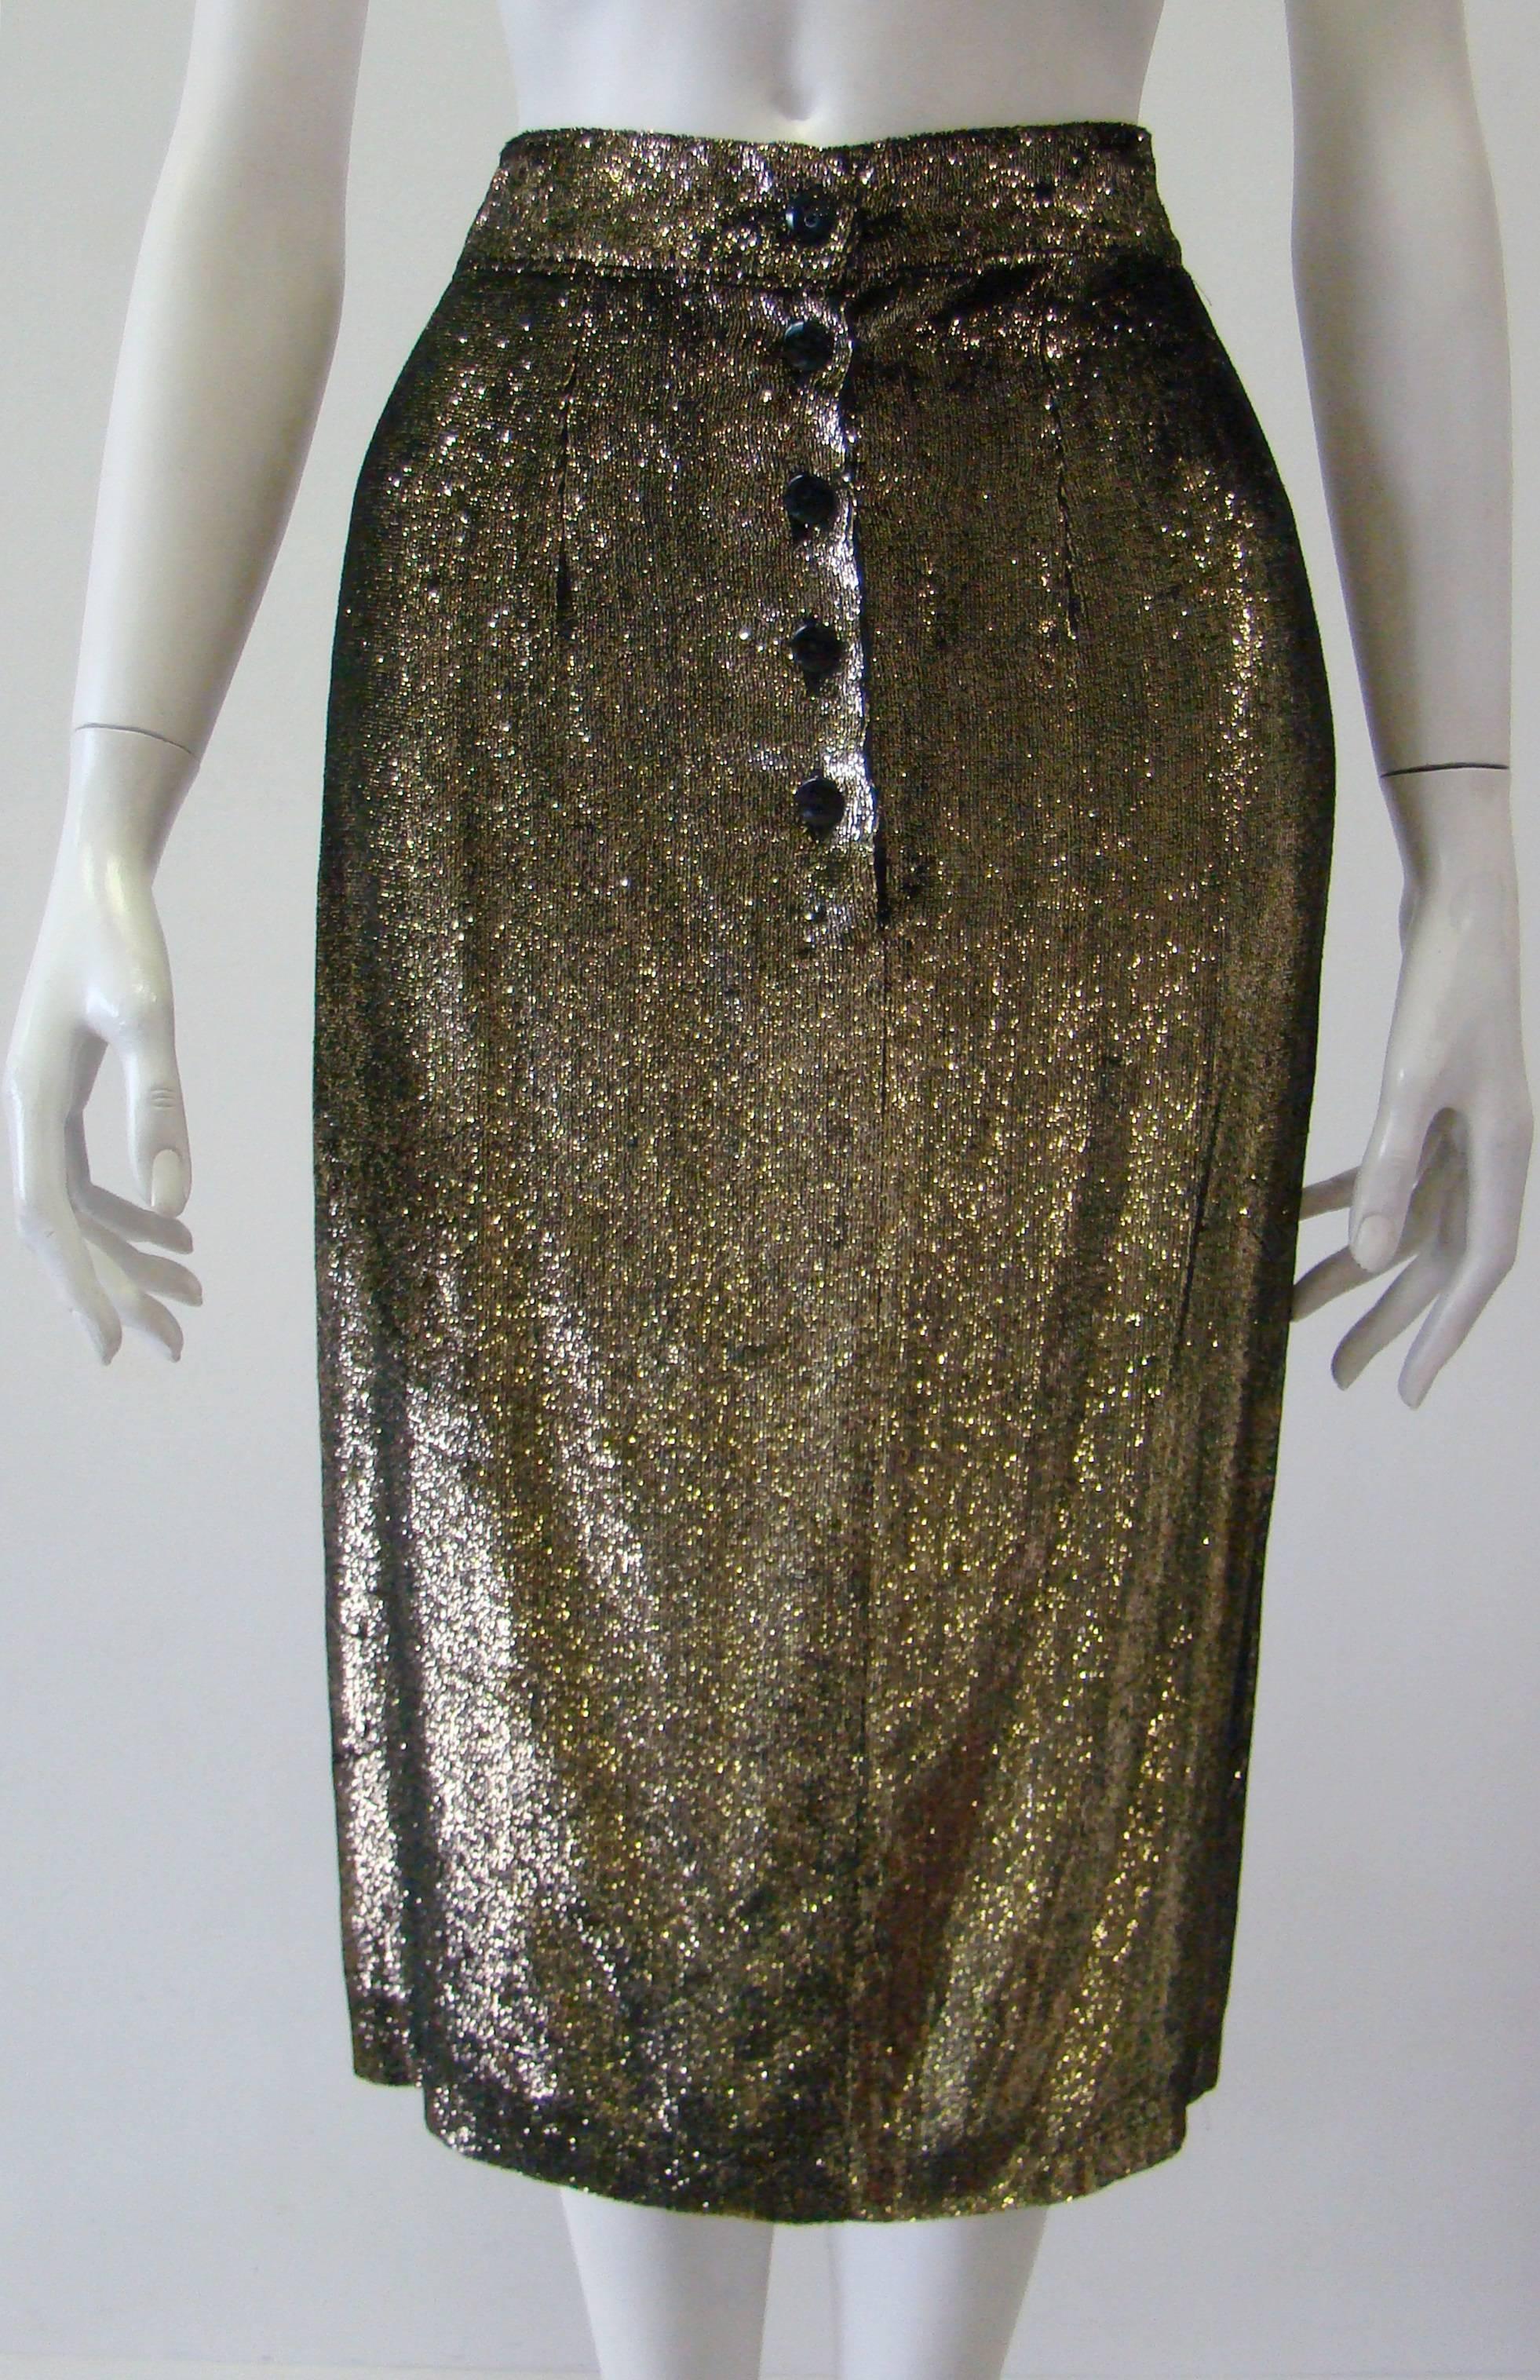 Black Istante By Gianni Versace Gold Lame Skirt Fall 1986 For Sale